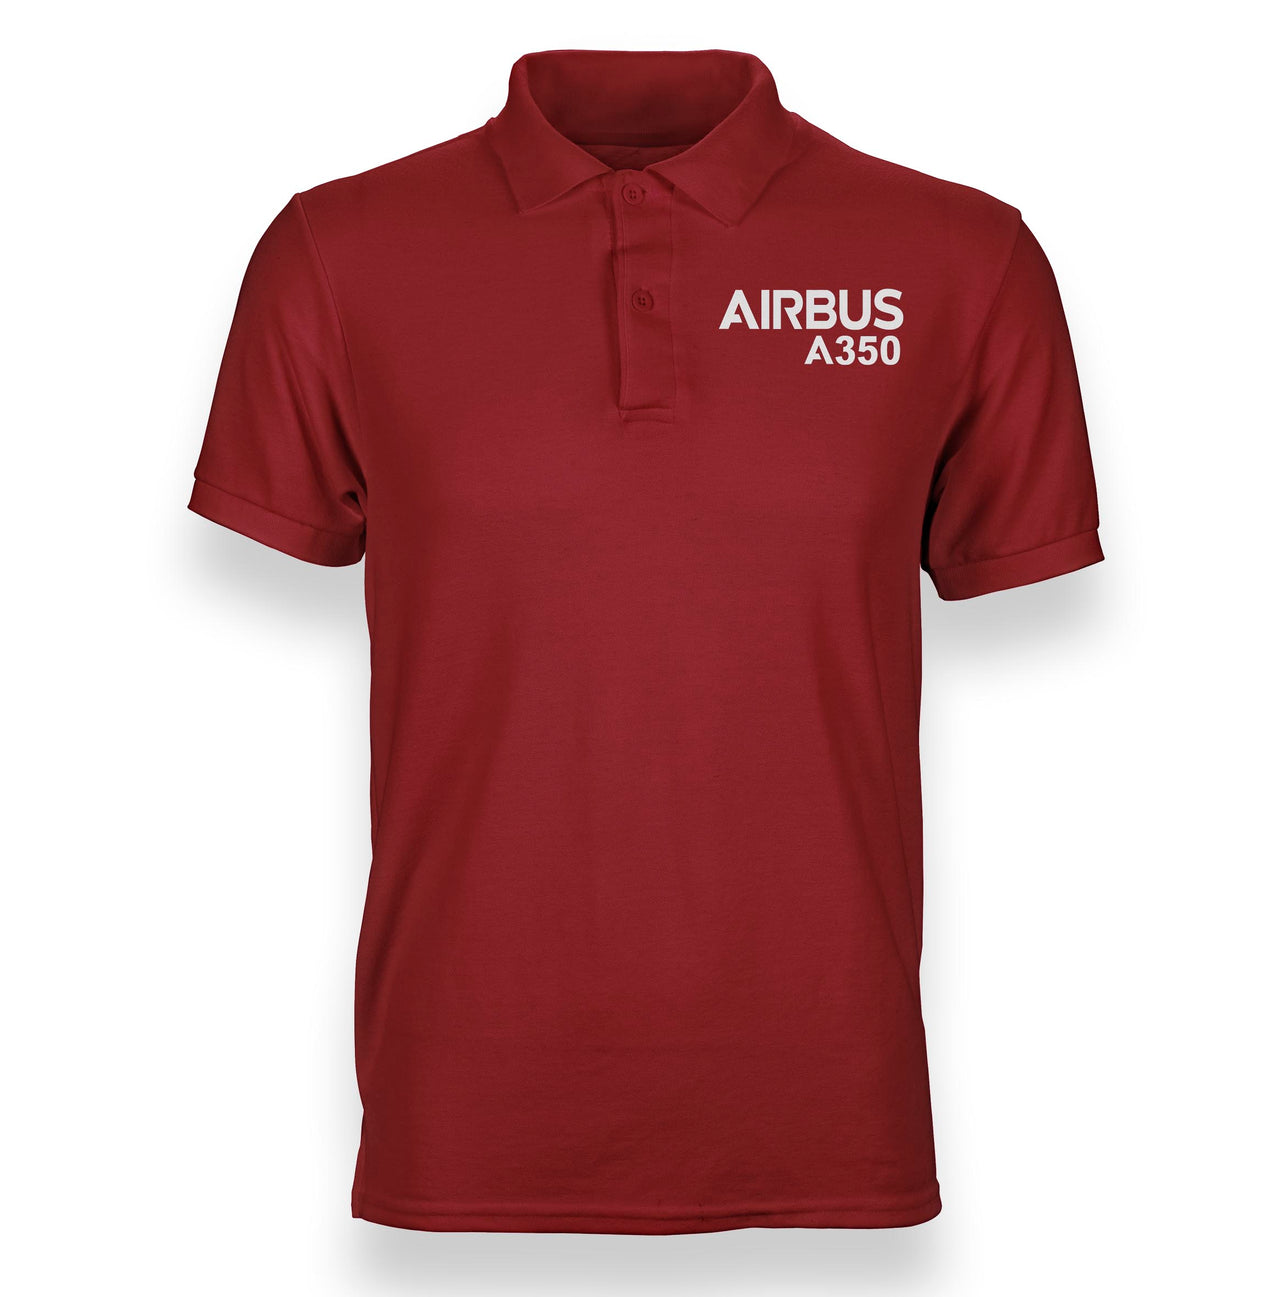 Airbus A350 & Text Designed Polo T-Shirts